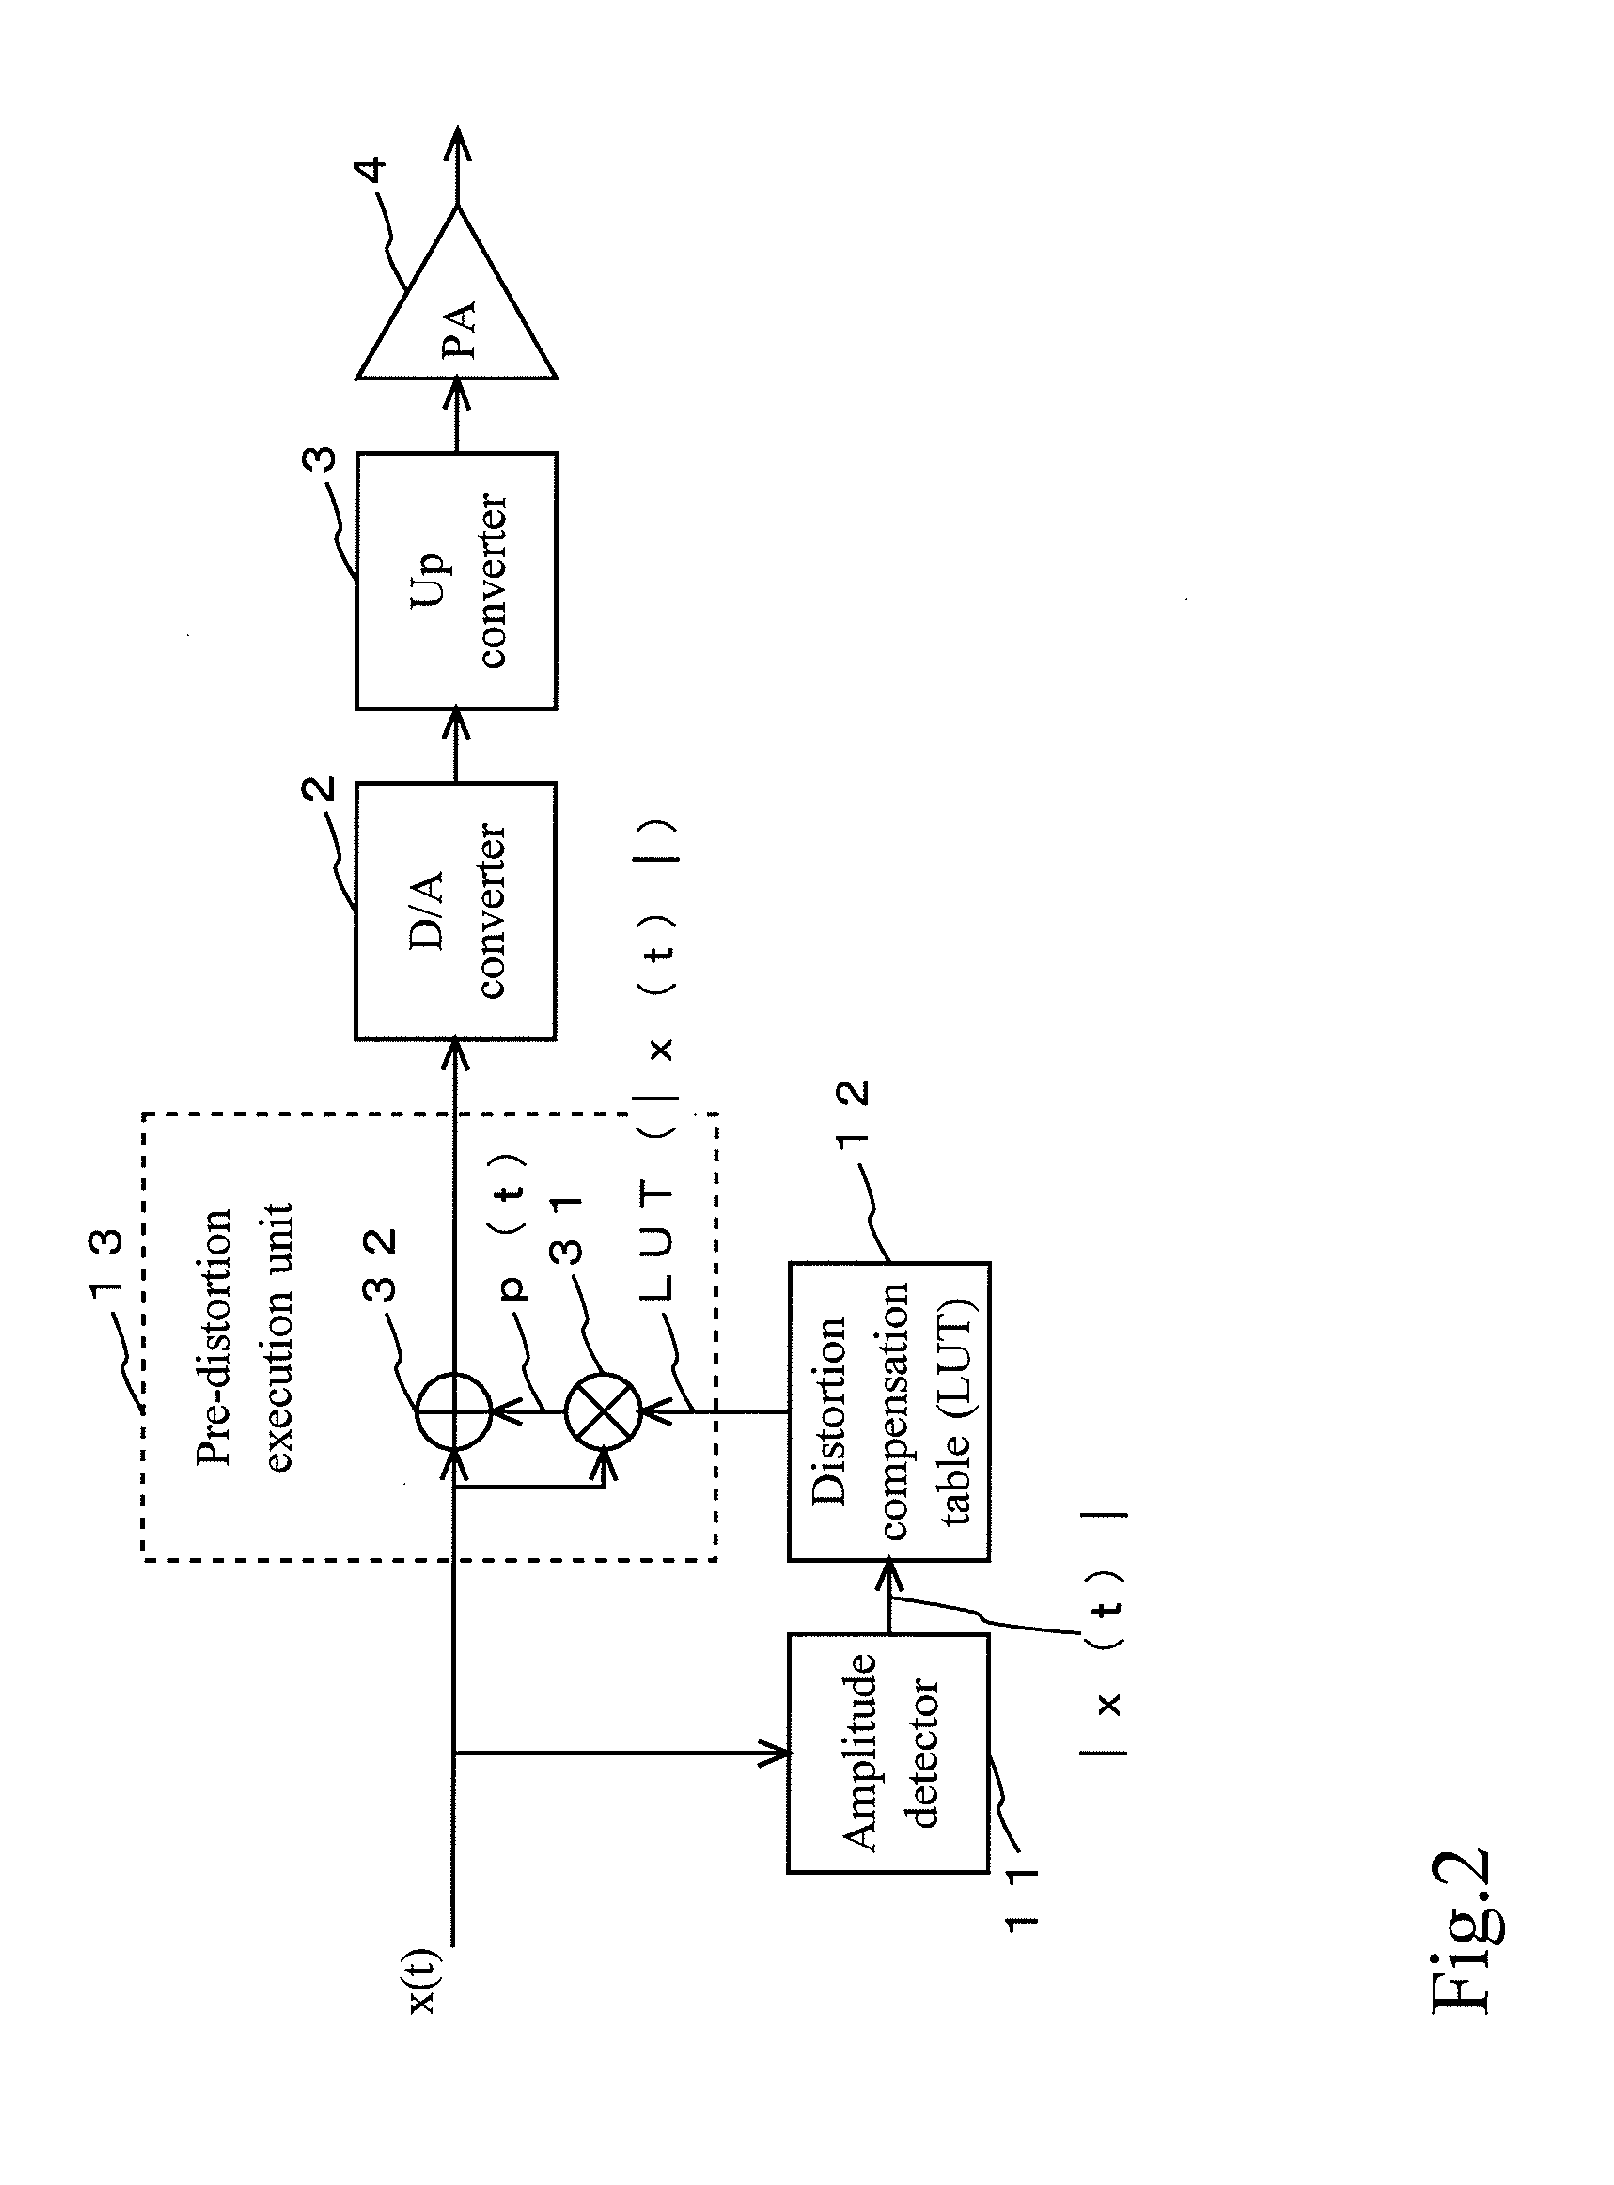 Distortion compensation amplification device